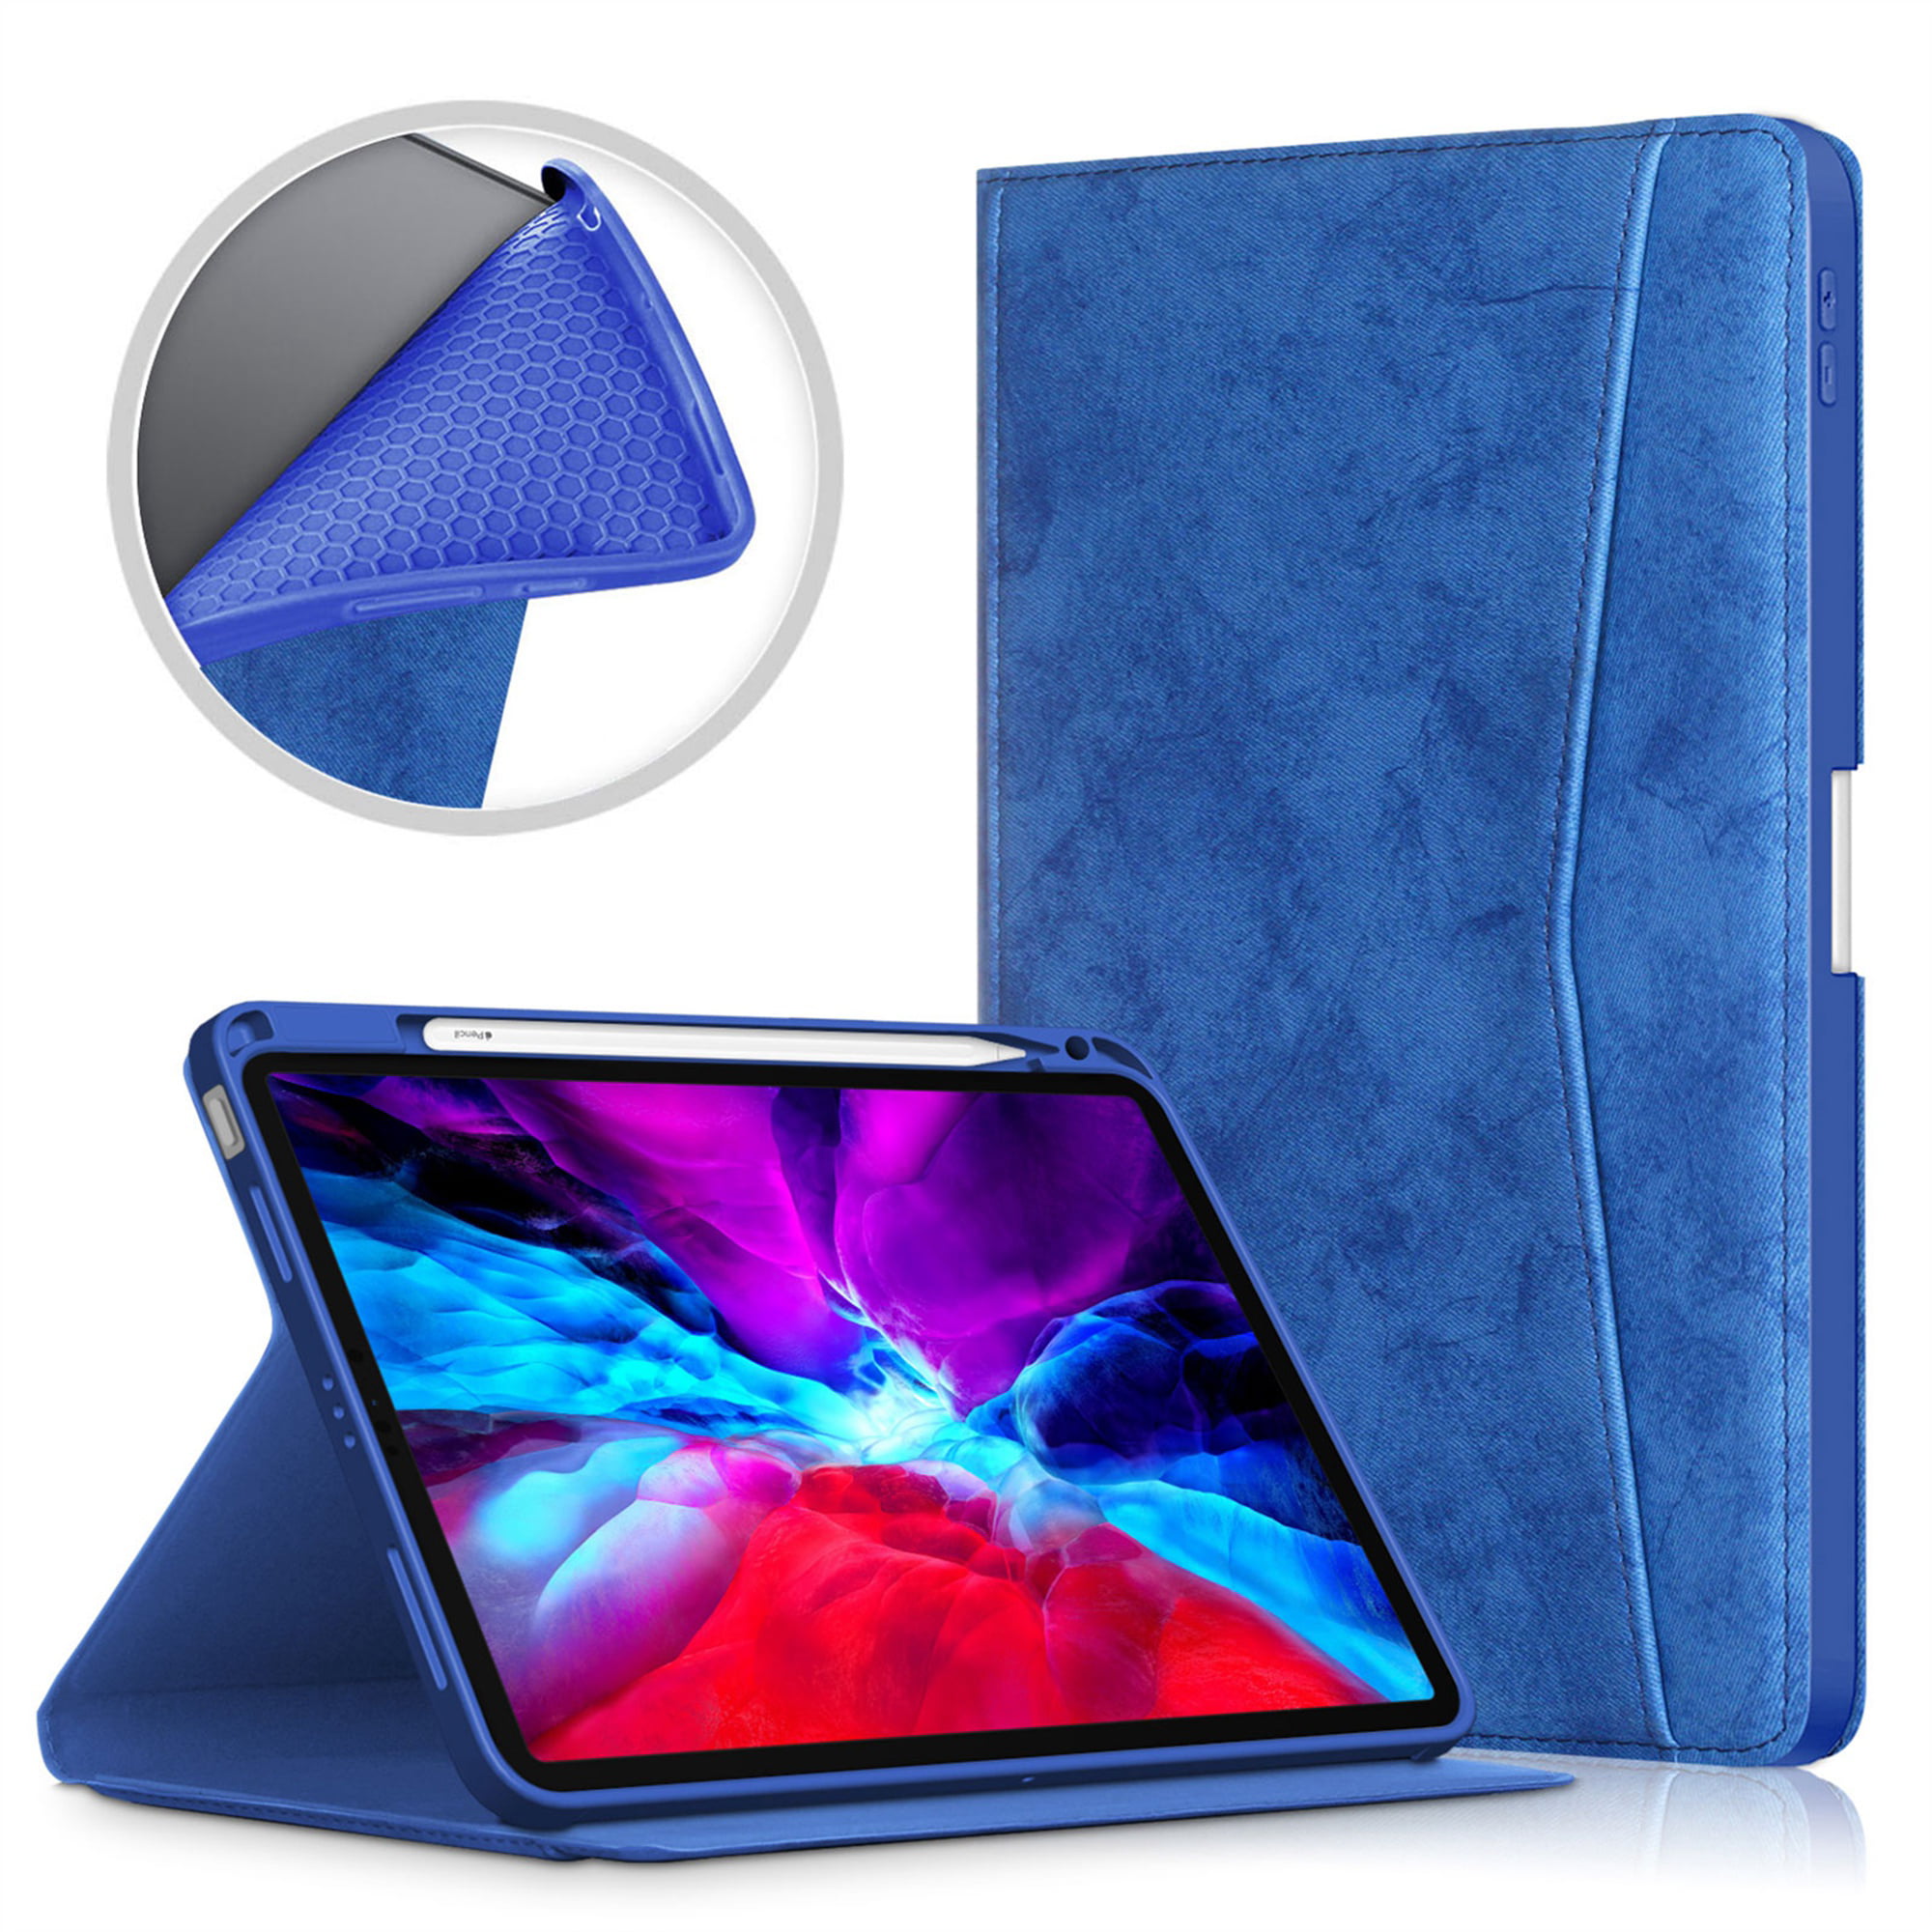 APPLE iPAD GENUINE CREAM LEATHER SMART COVER FOR 2nd  & NEW 3d & 4th GEN DESIGNS 